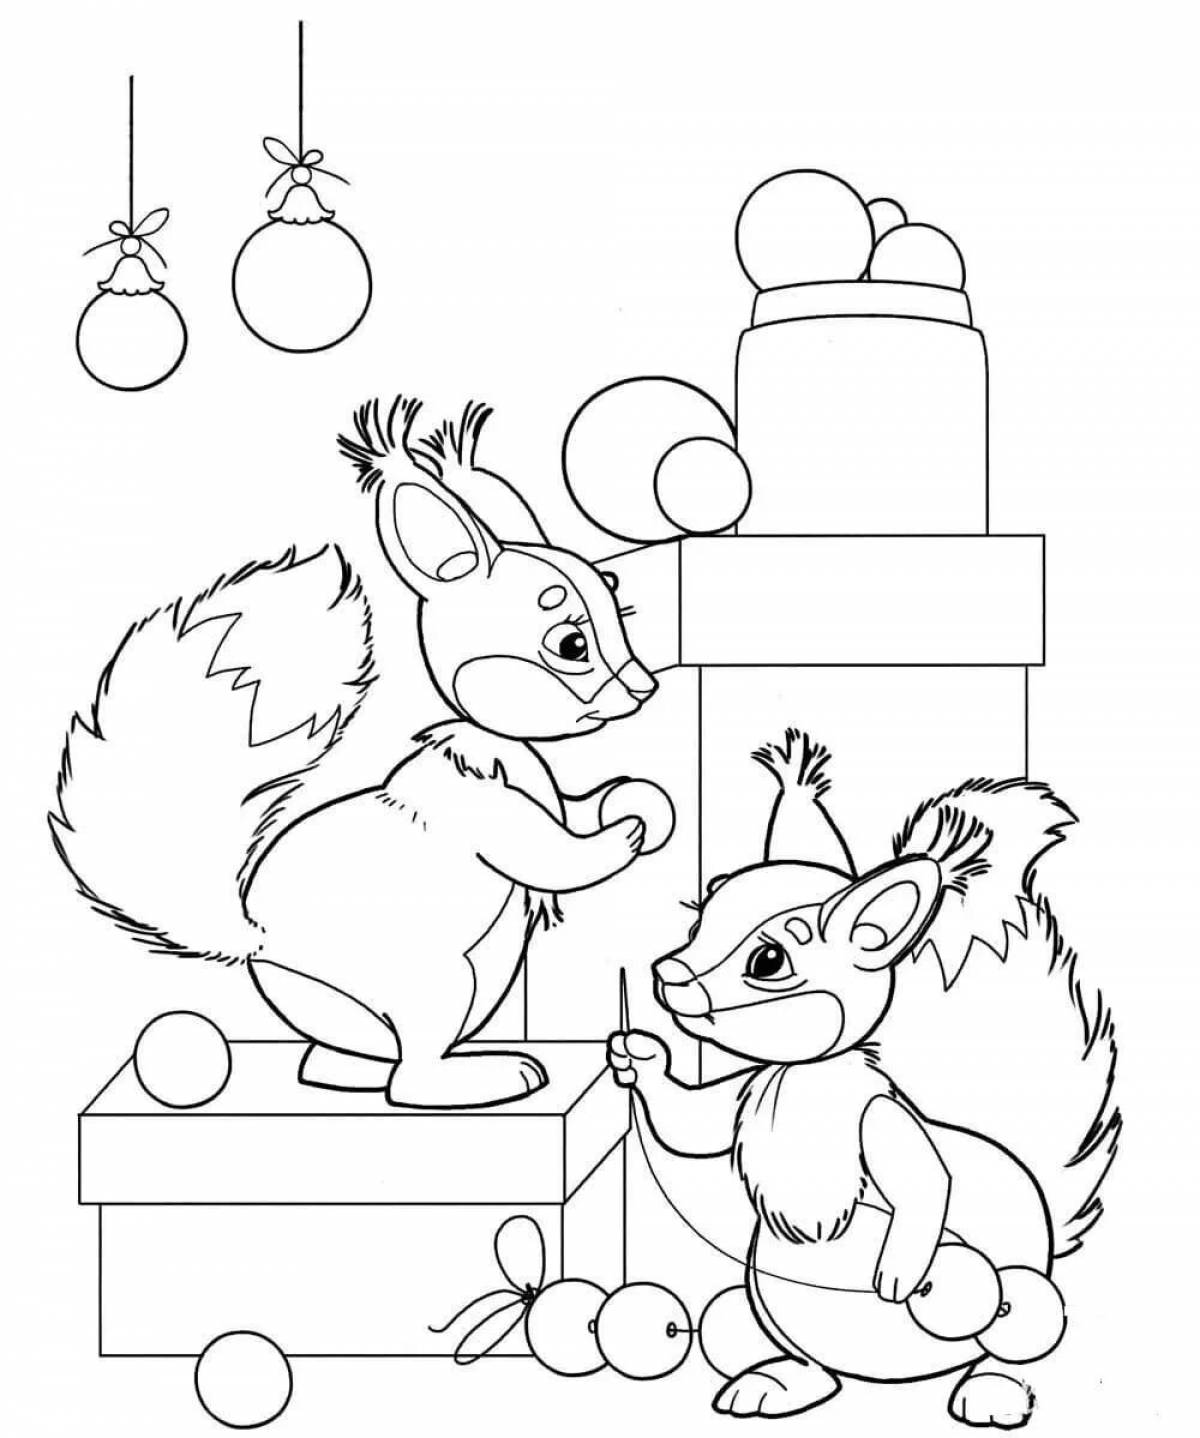 Inviting coloring book squirrel for children 2-3 years old